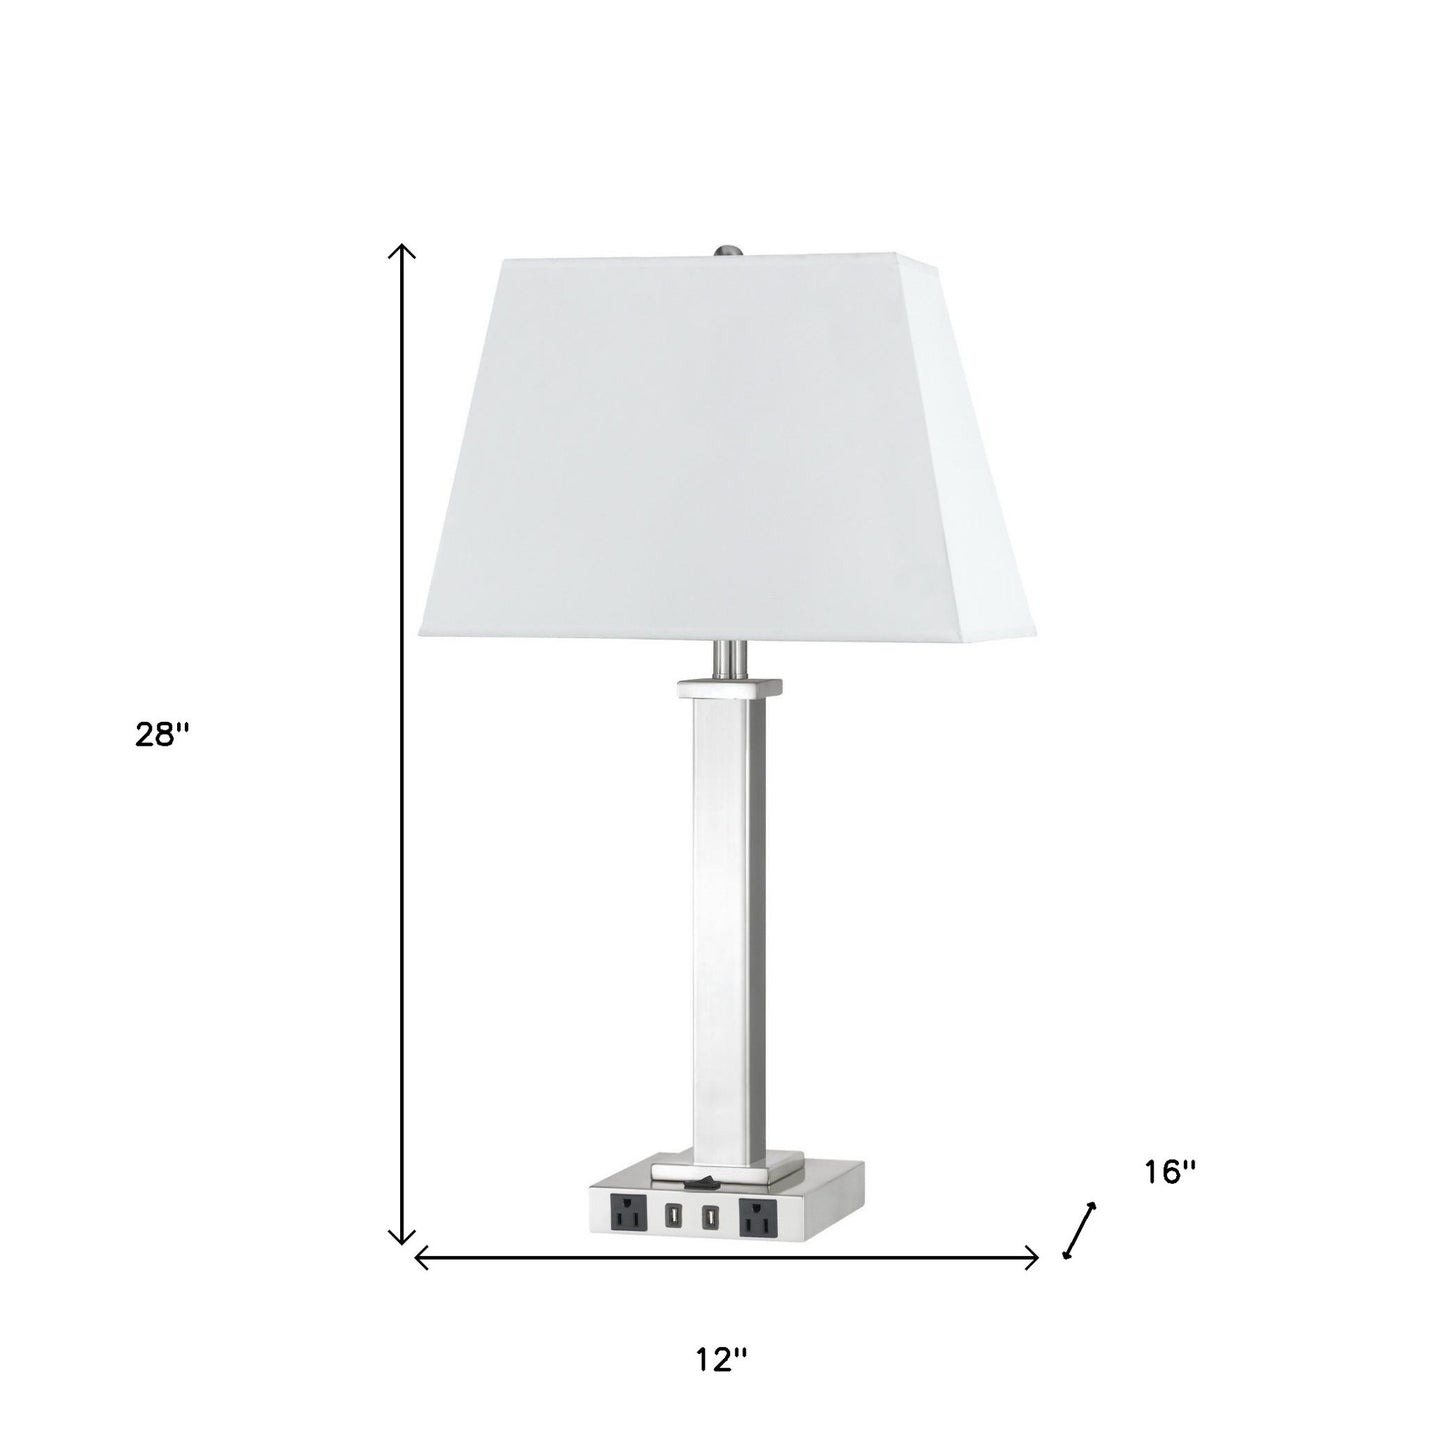 28" Nickel Metal Usb Table Lamp With White Novelty Shade